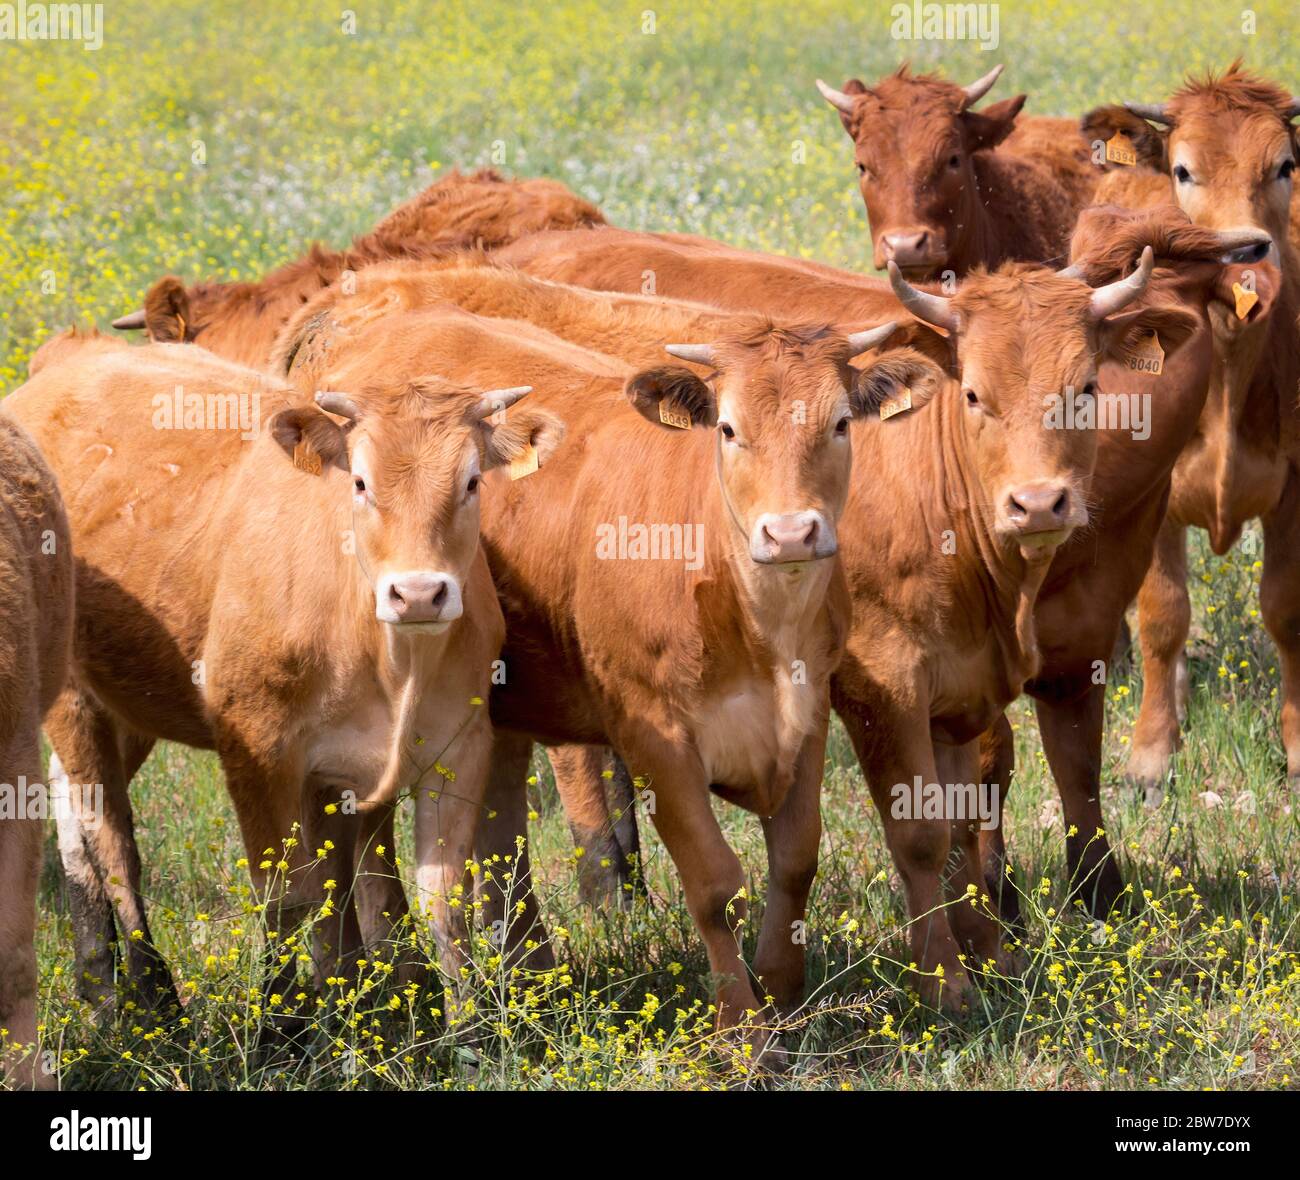 near Puerto de la Encina, Seville Province, Andalusia, southern Spain.  Herd of curious cows in field. Stock Photo